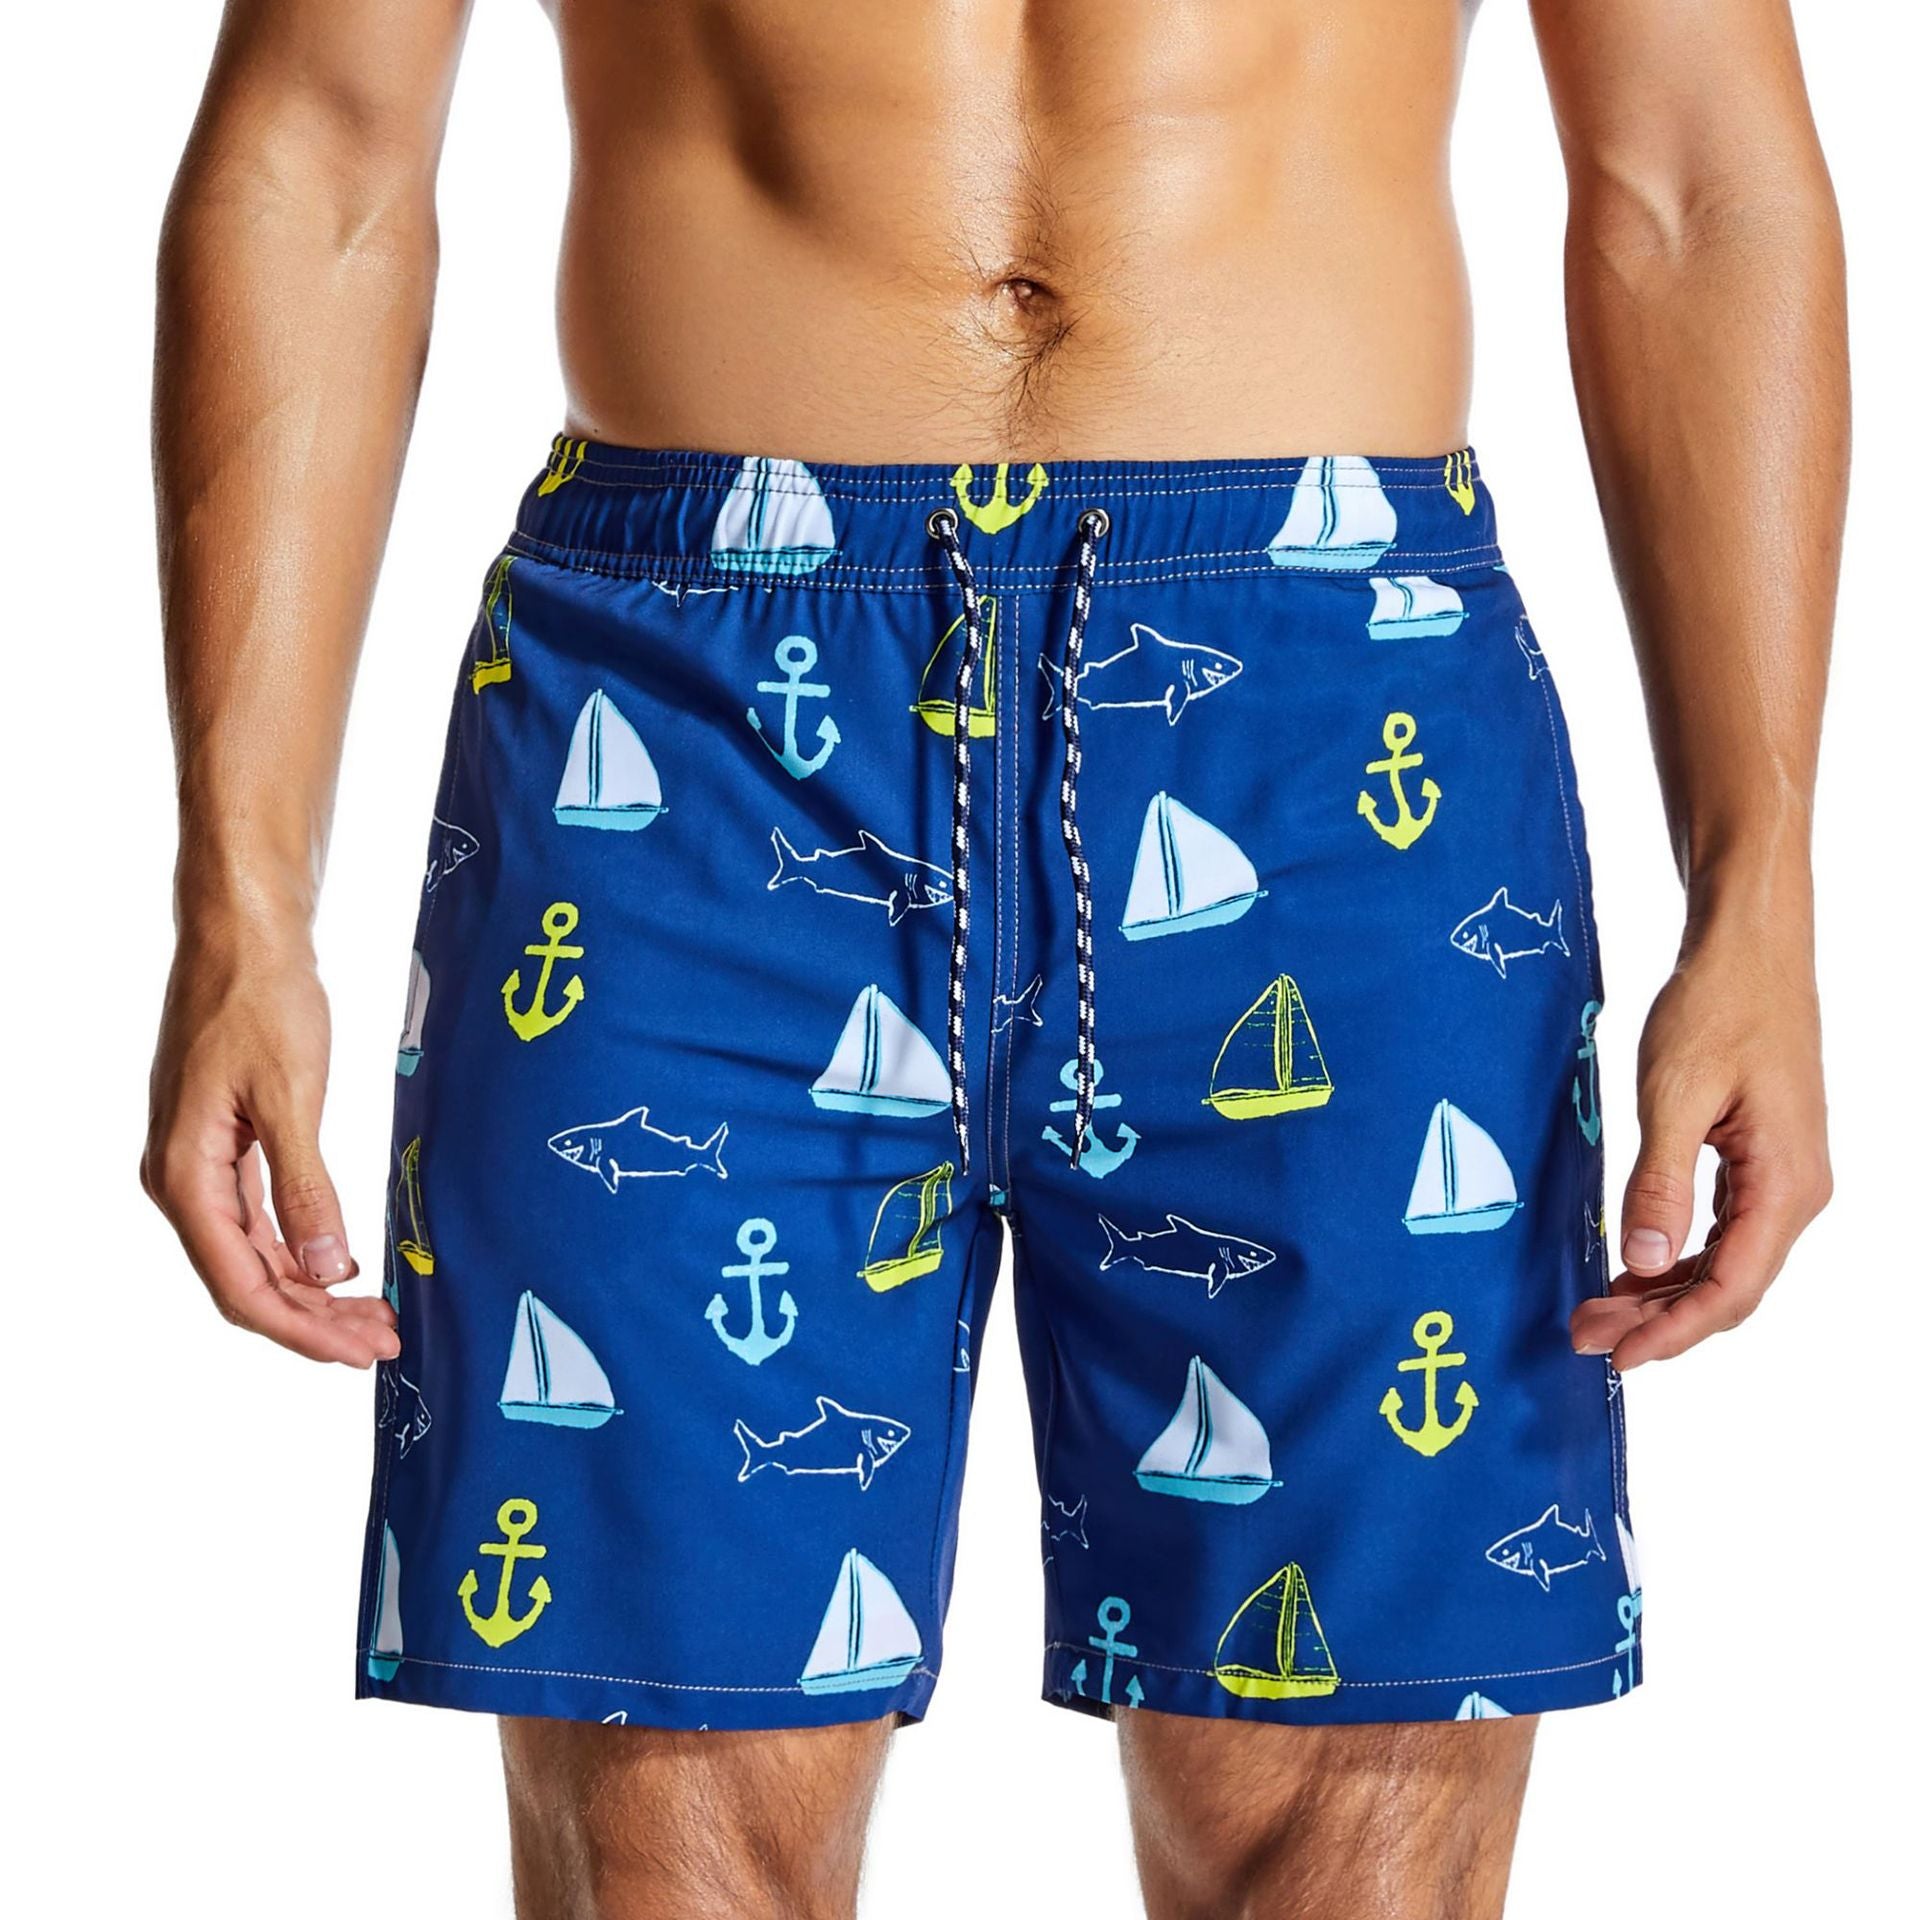 Men's Swim Trunks with Compression Liner Quick Dry 7" Inseam Swimsuit Swimwear - Boat Anchors